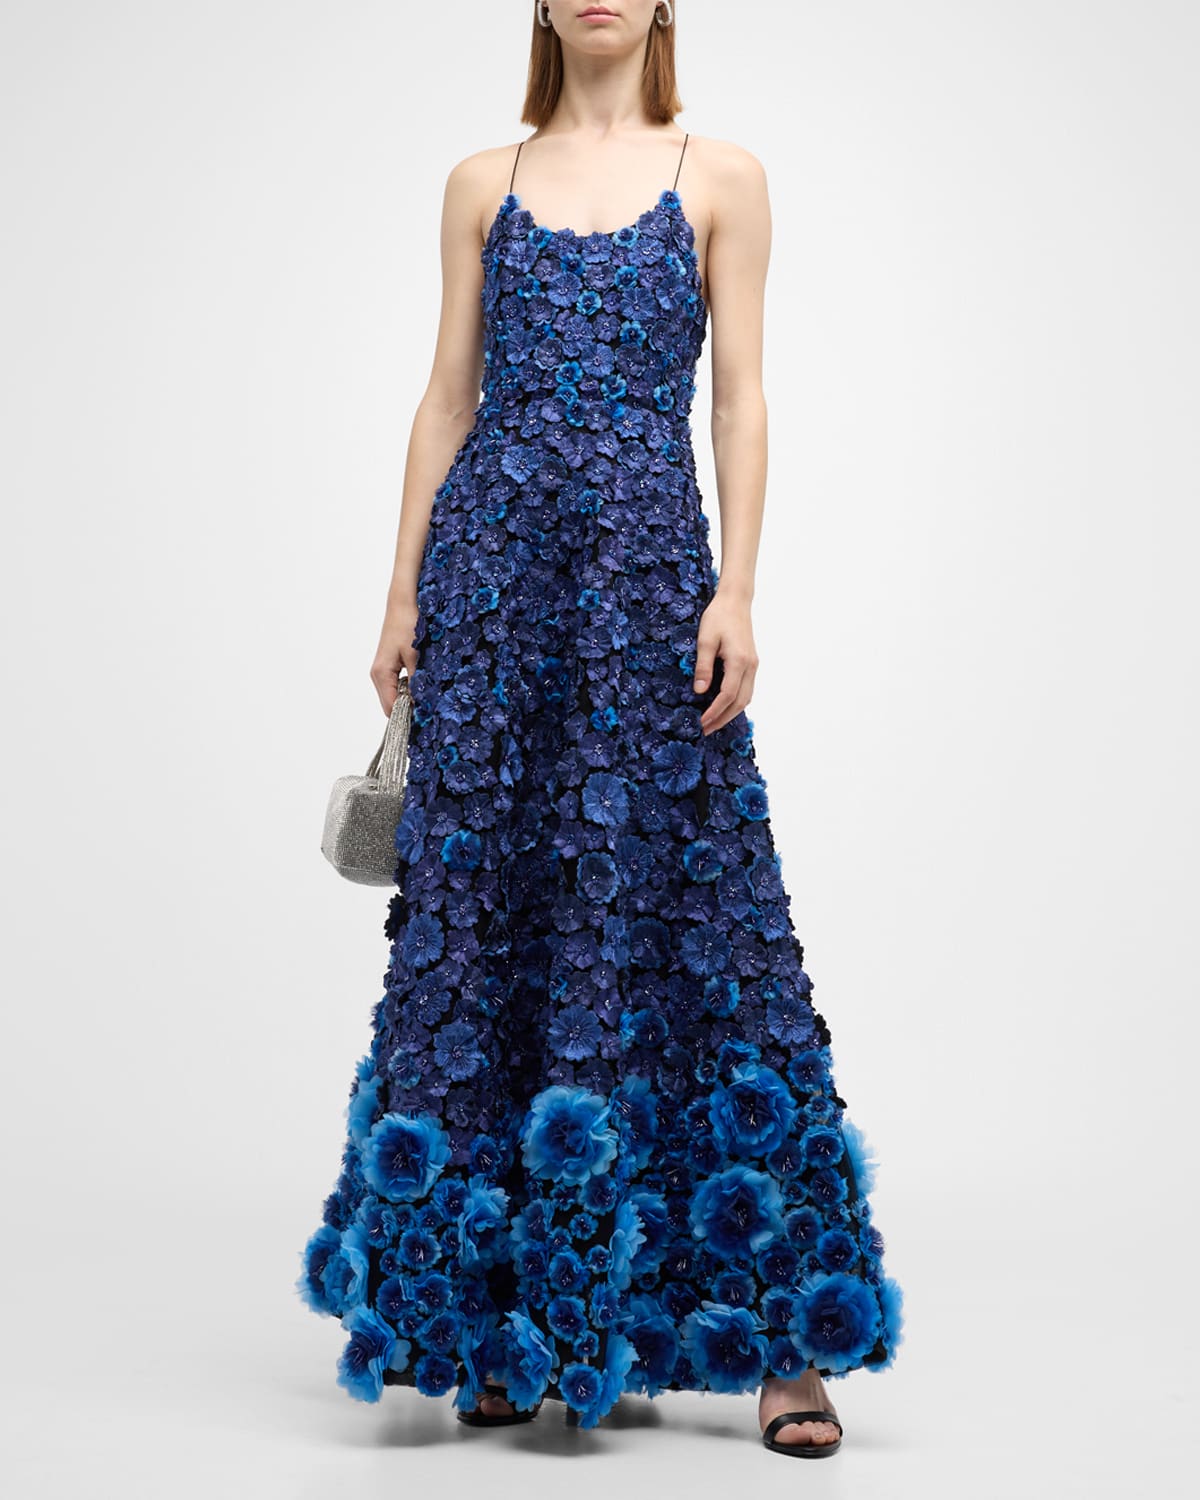 ALICE AND OLIVIA DOMINIQUE FLORAL-EMBELLISHED BALL GOWN